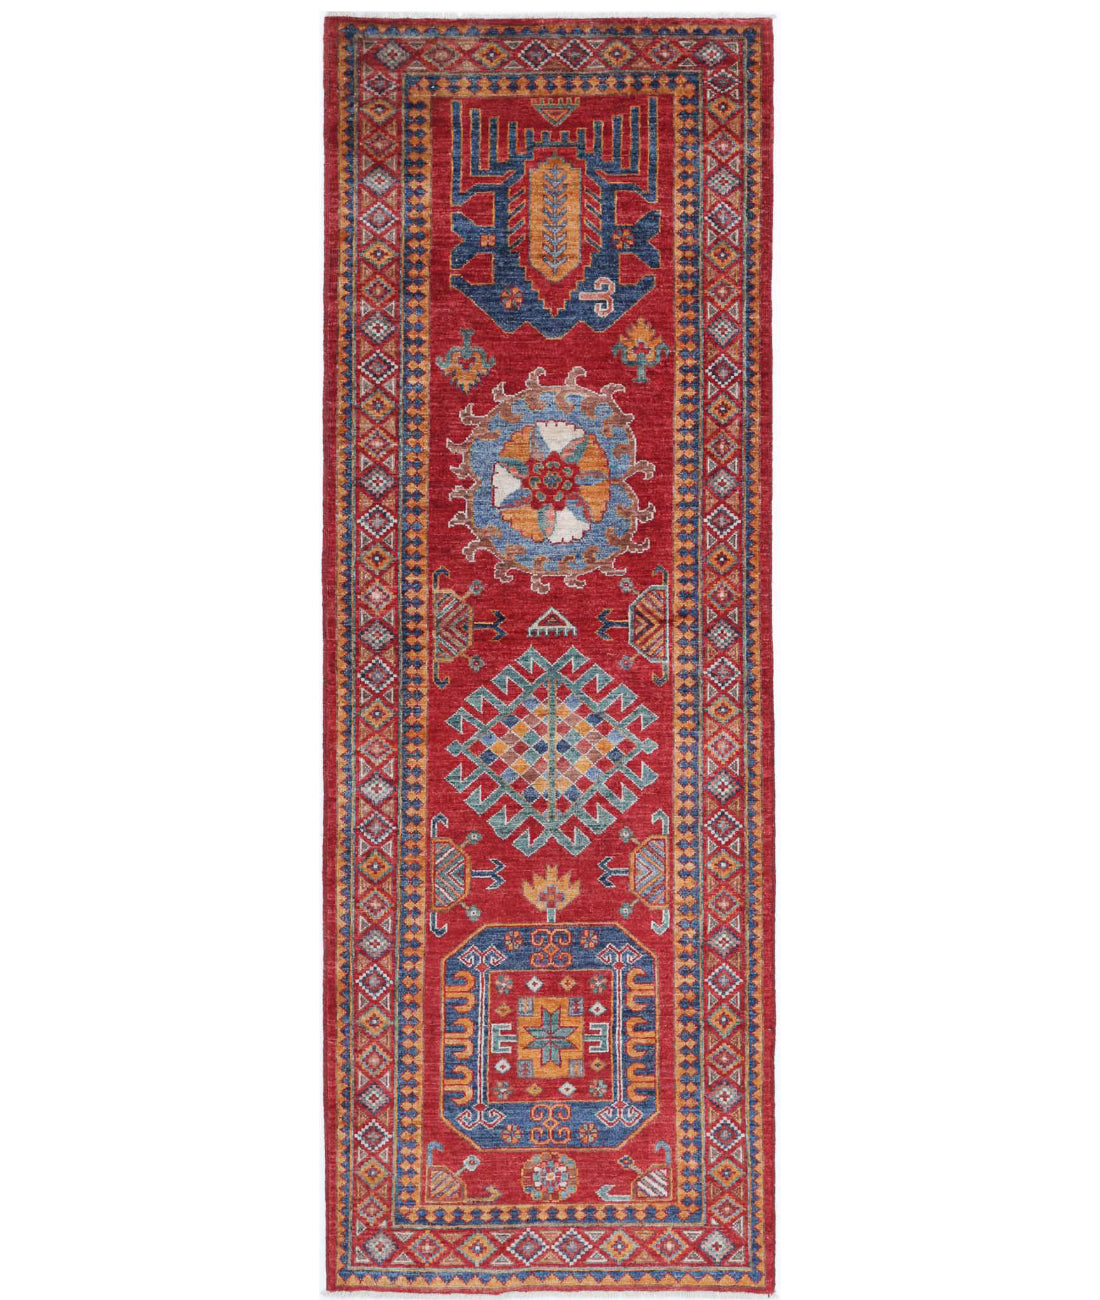 Hand Knotted Nomadic Caucasian Humna Wool Rug - 2&#39;10&#39;&#39; x 8&#39;3&#39;&#39; 2&#39;10&#39;&#39; x 8&#39;3&#39;&#39; (85 X 248) / Red / Blue